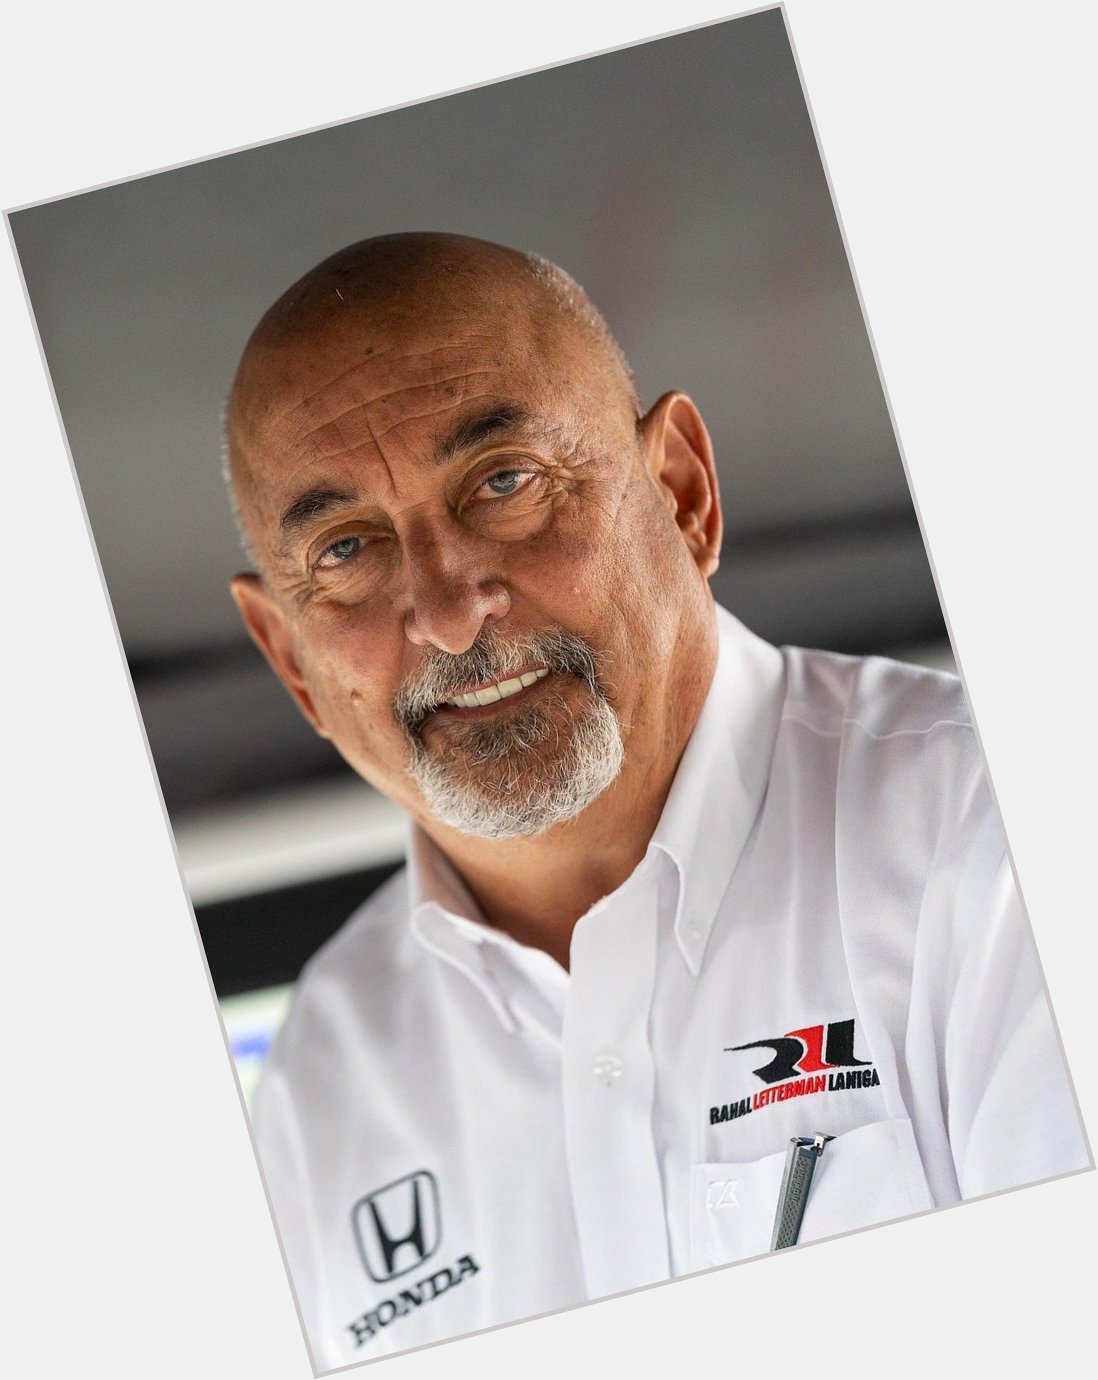 Happy Birthday to Bobby Rahal. A former Honorary Race Director and sponsor of PVGP for years. 